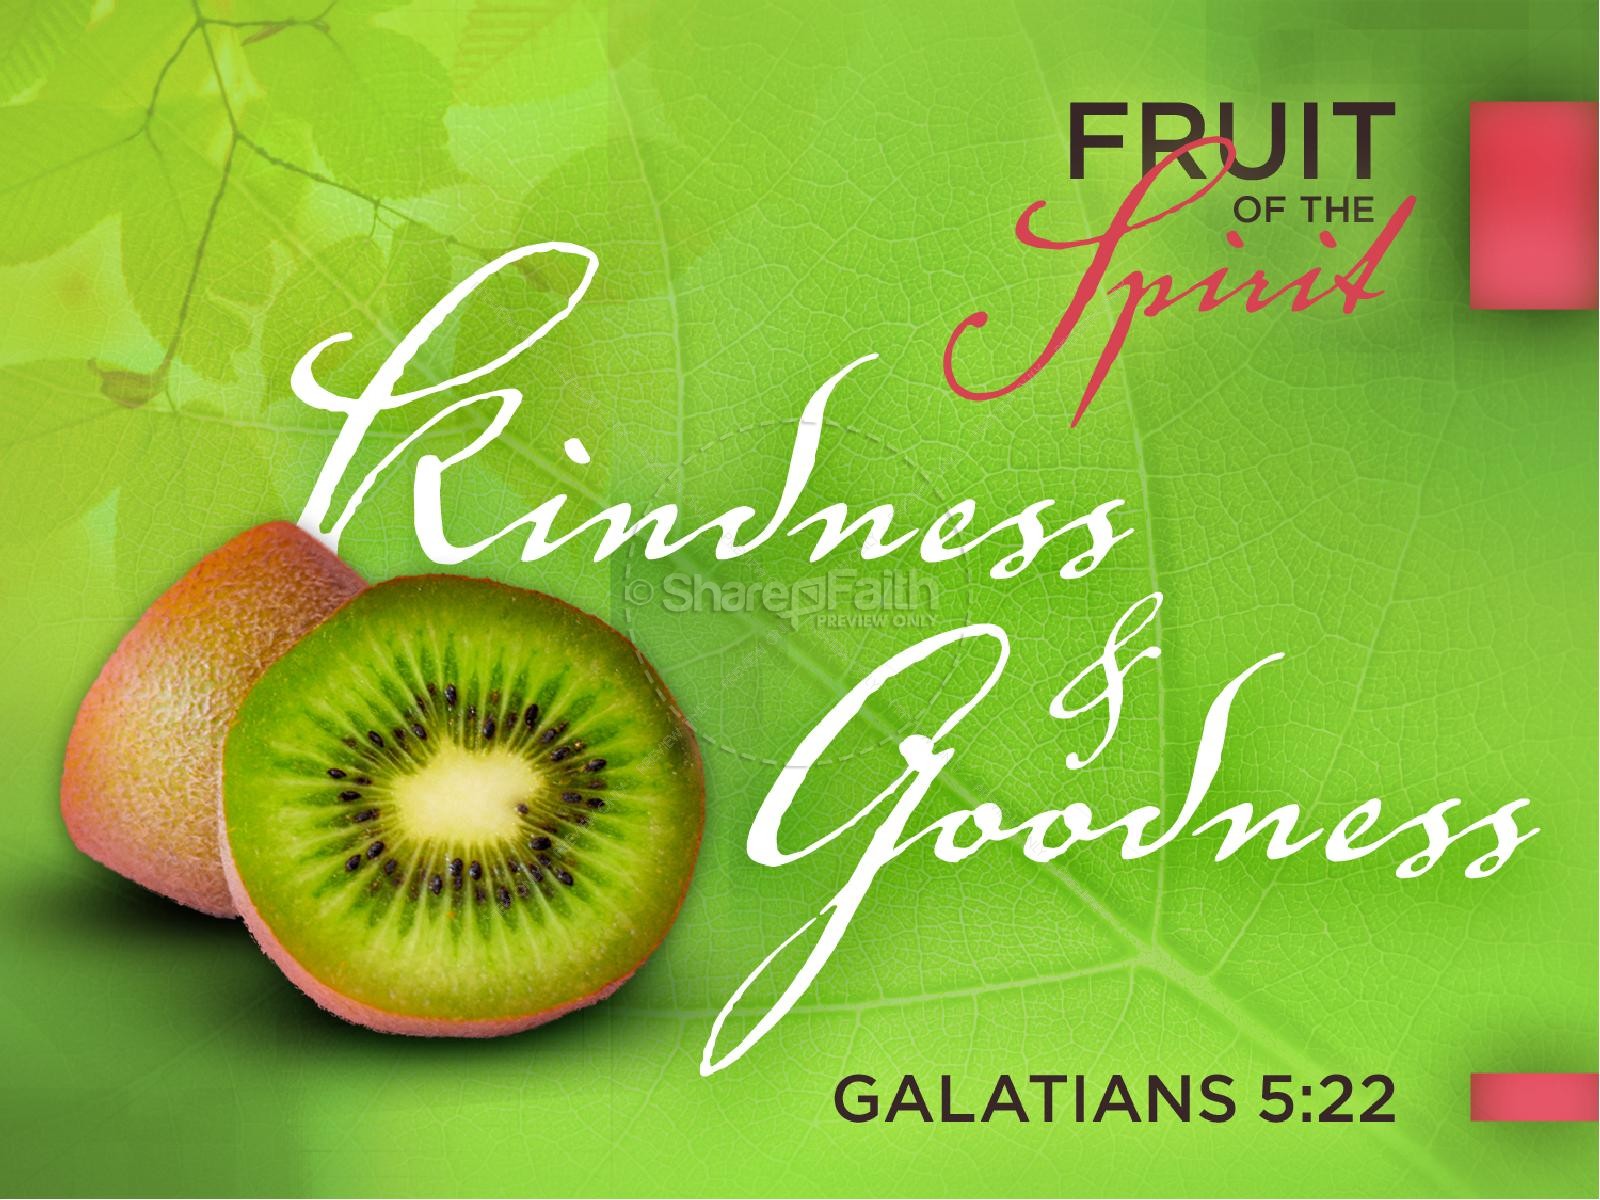 Are you Fruitful?